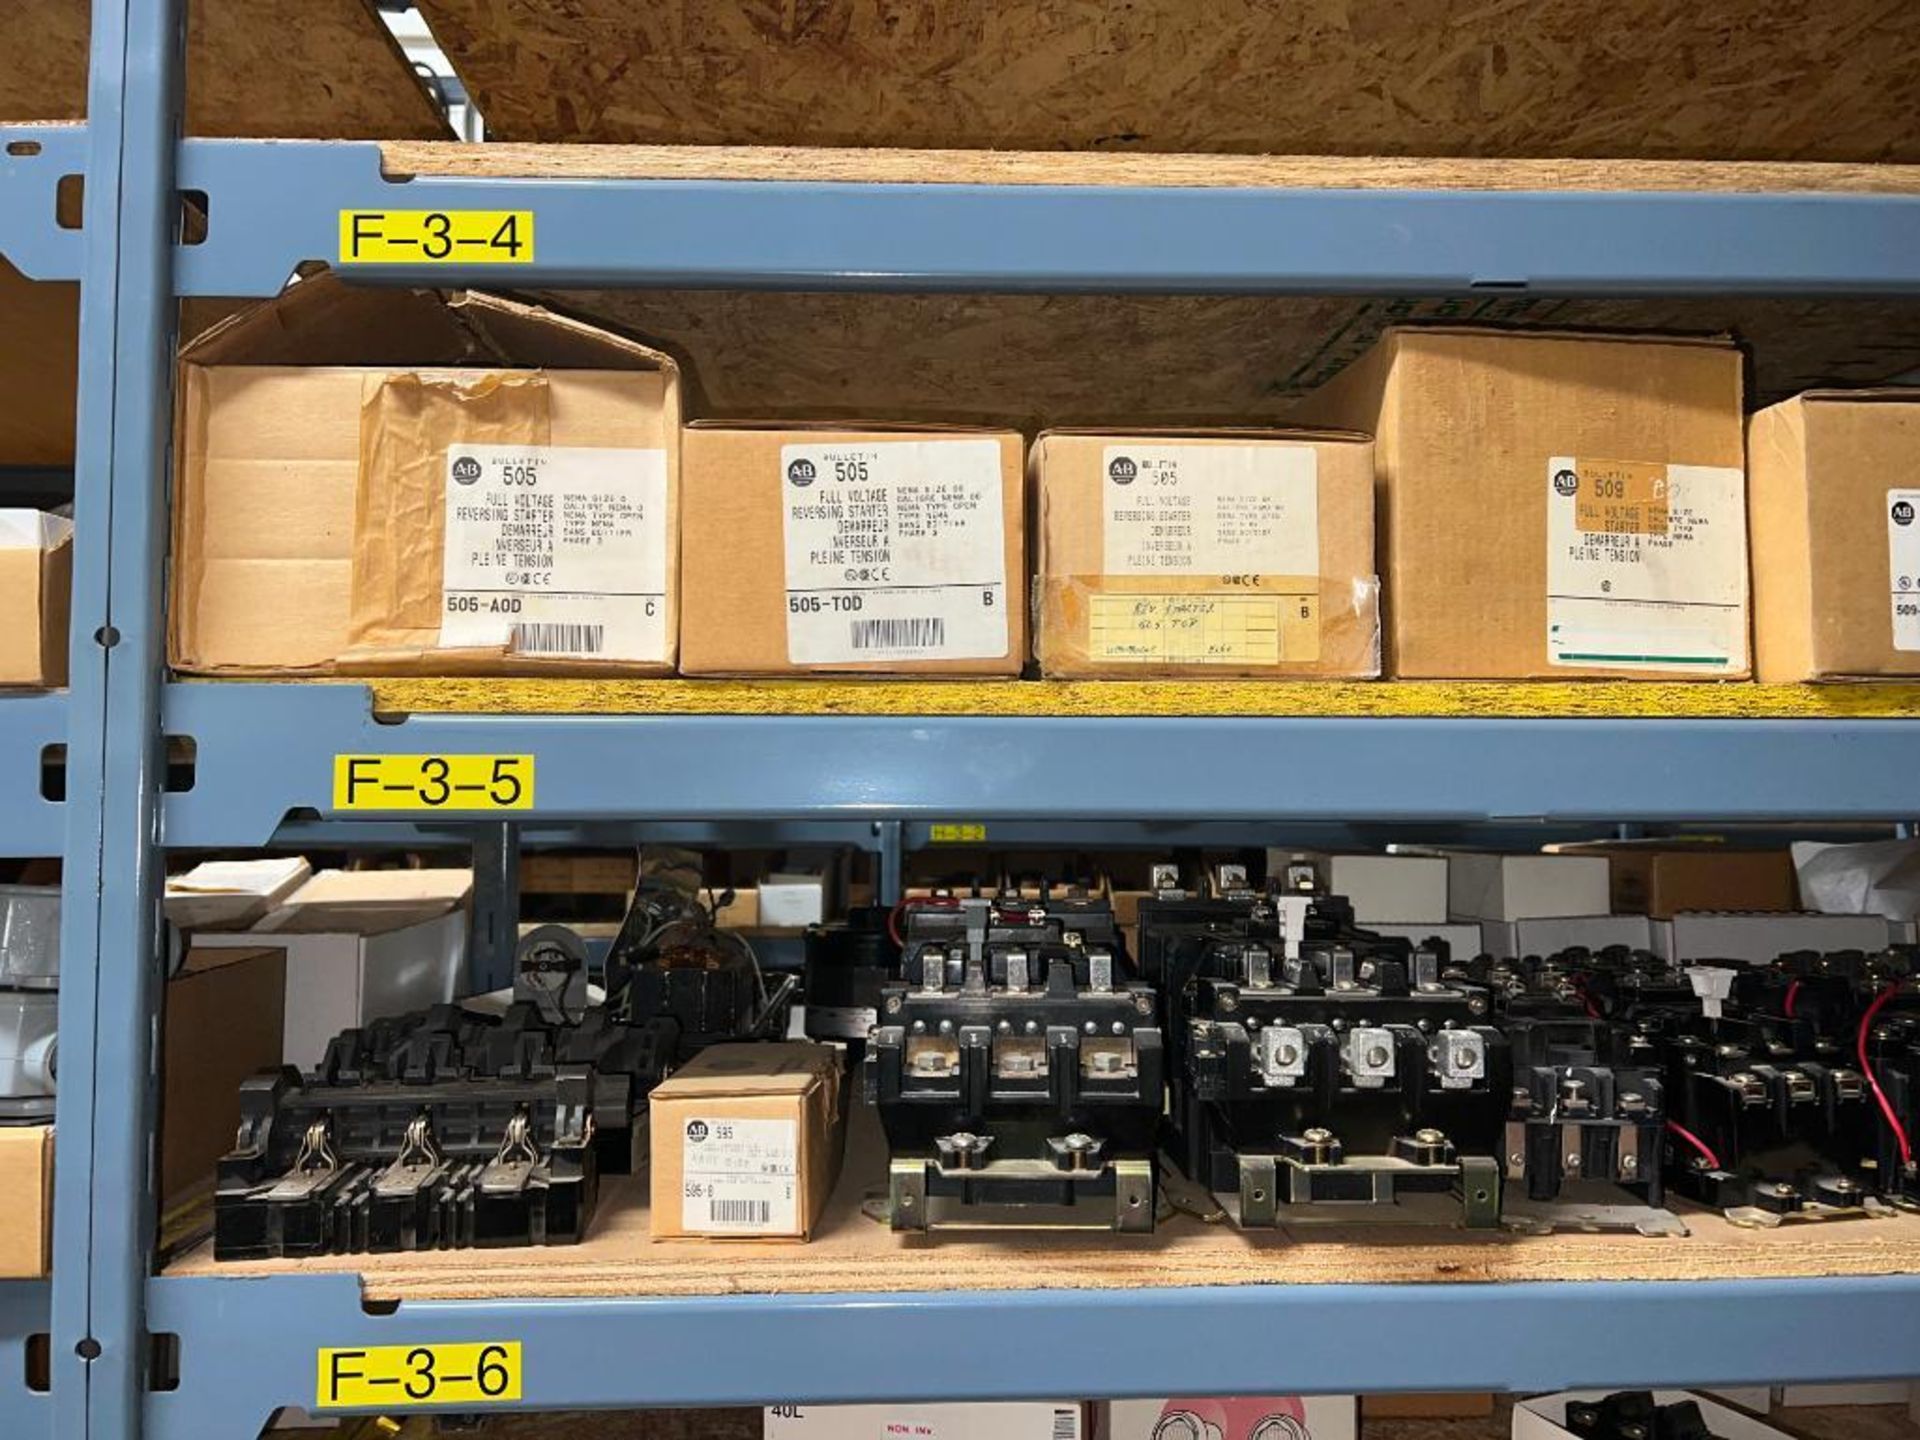 Assorted Electrical Equipment, Including: Circuit Breakers, Conduit, Conduit Adapters and Enclosures - Image 33 of 46